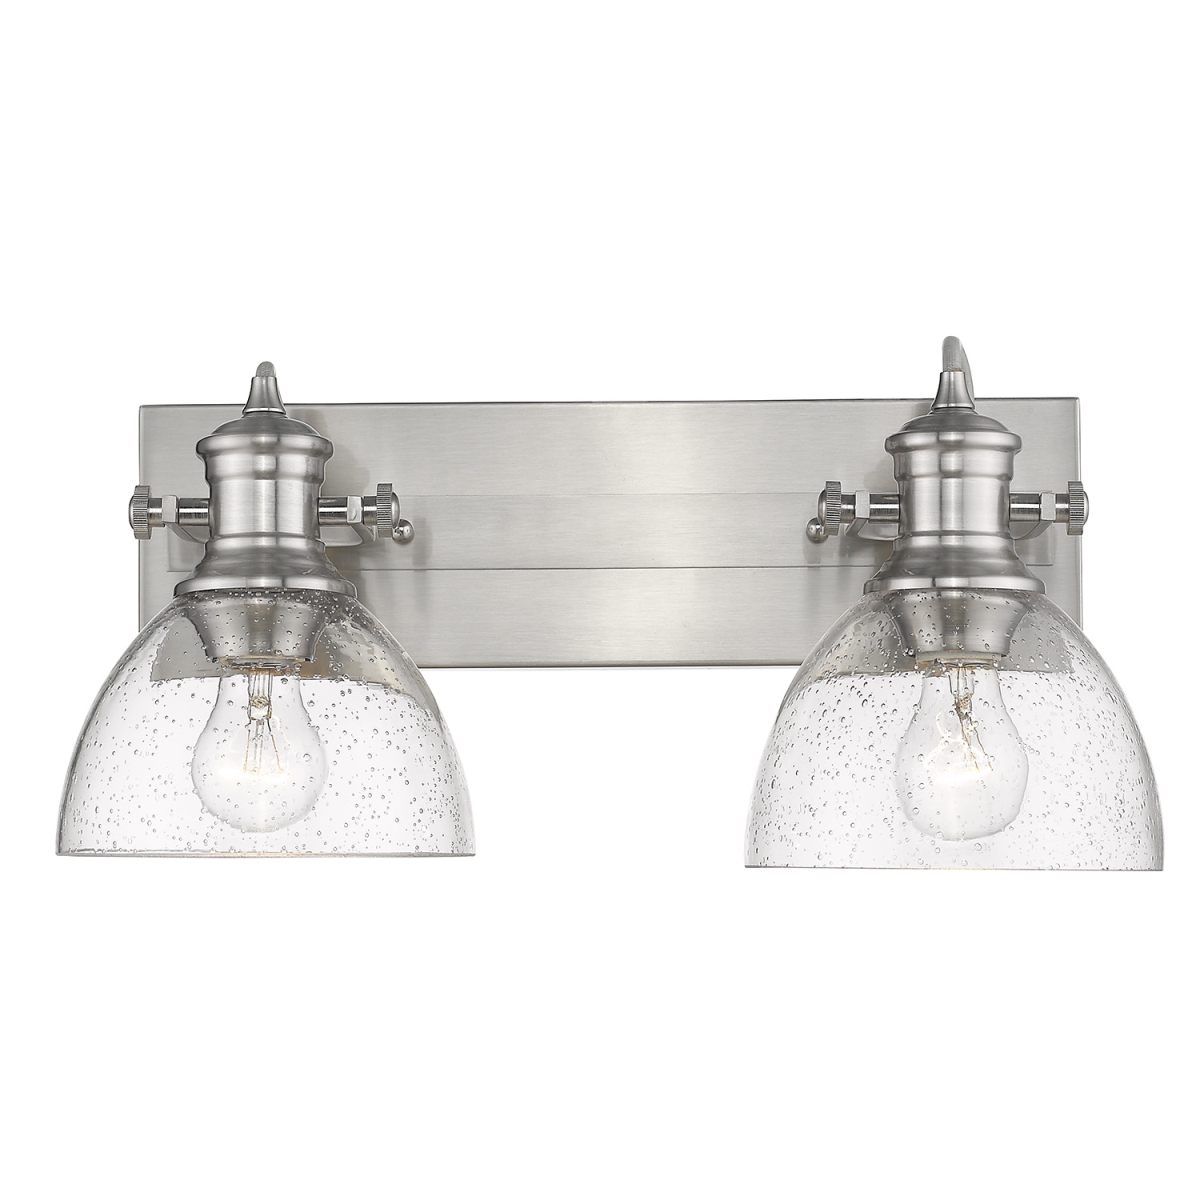 18 in. Hines 2 Lights Pewter Bath Fixture Wall Light with Seeded Glass, Silver -  SUPERSHINE, SU1550082